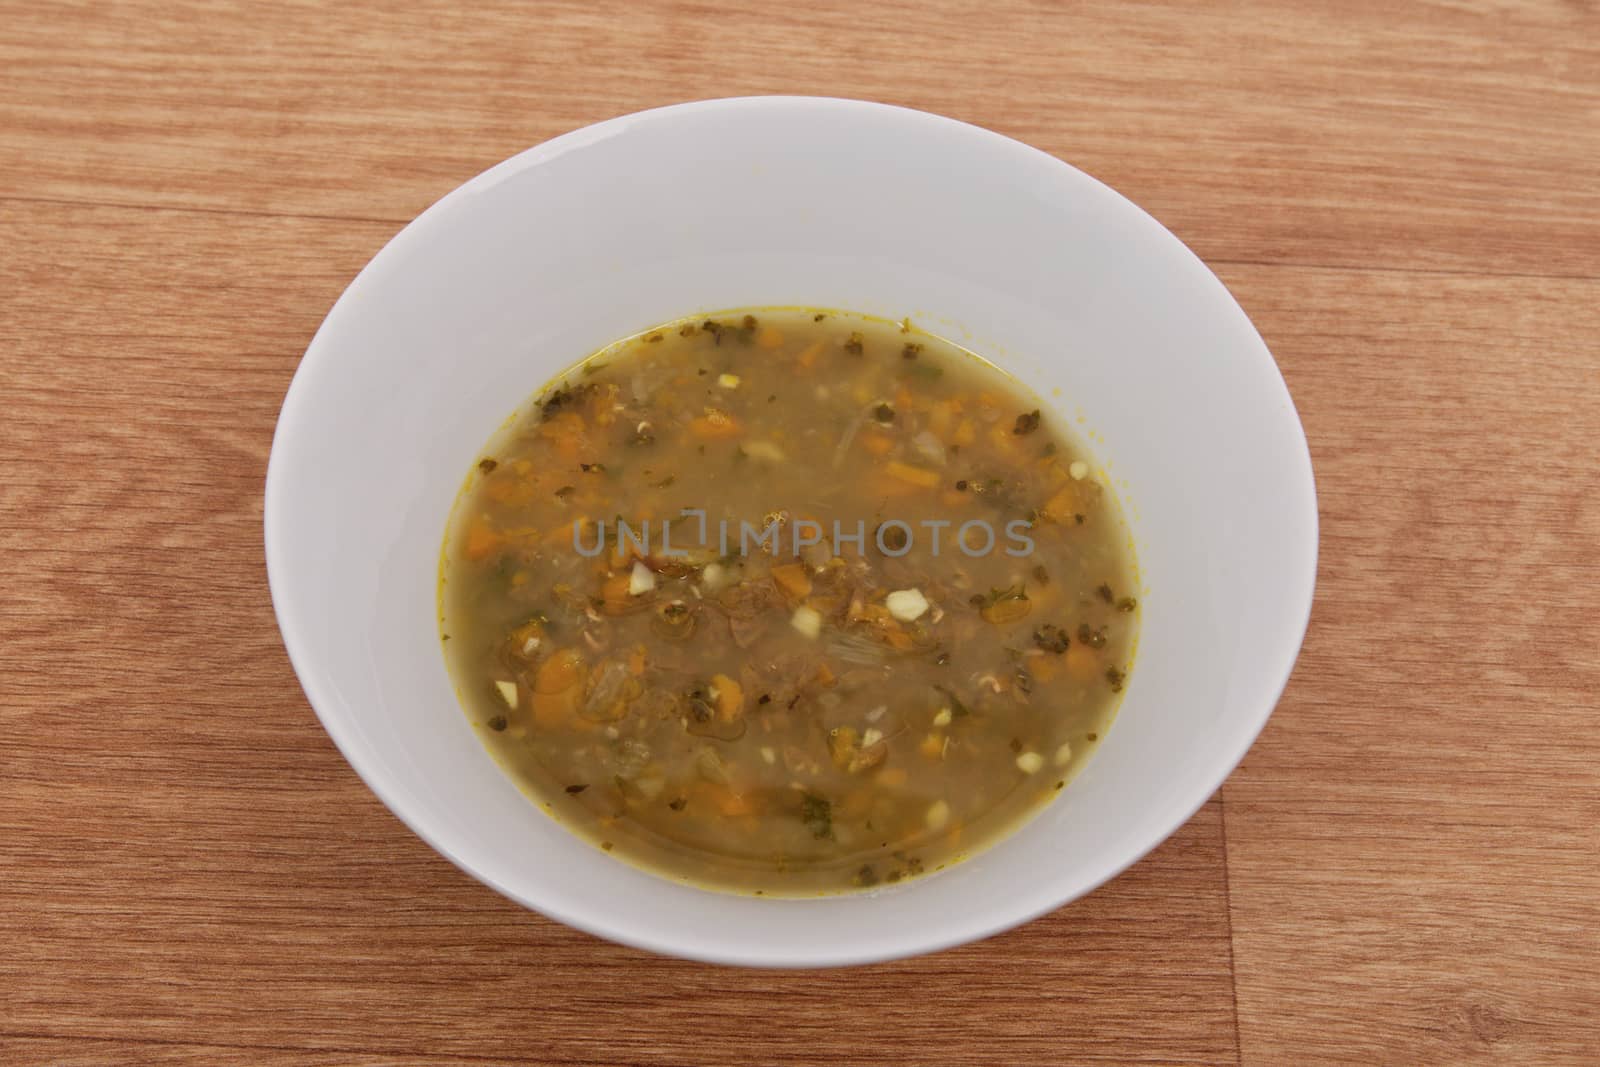 Lentil soup with carrot on a wooden table